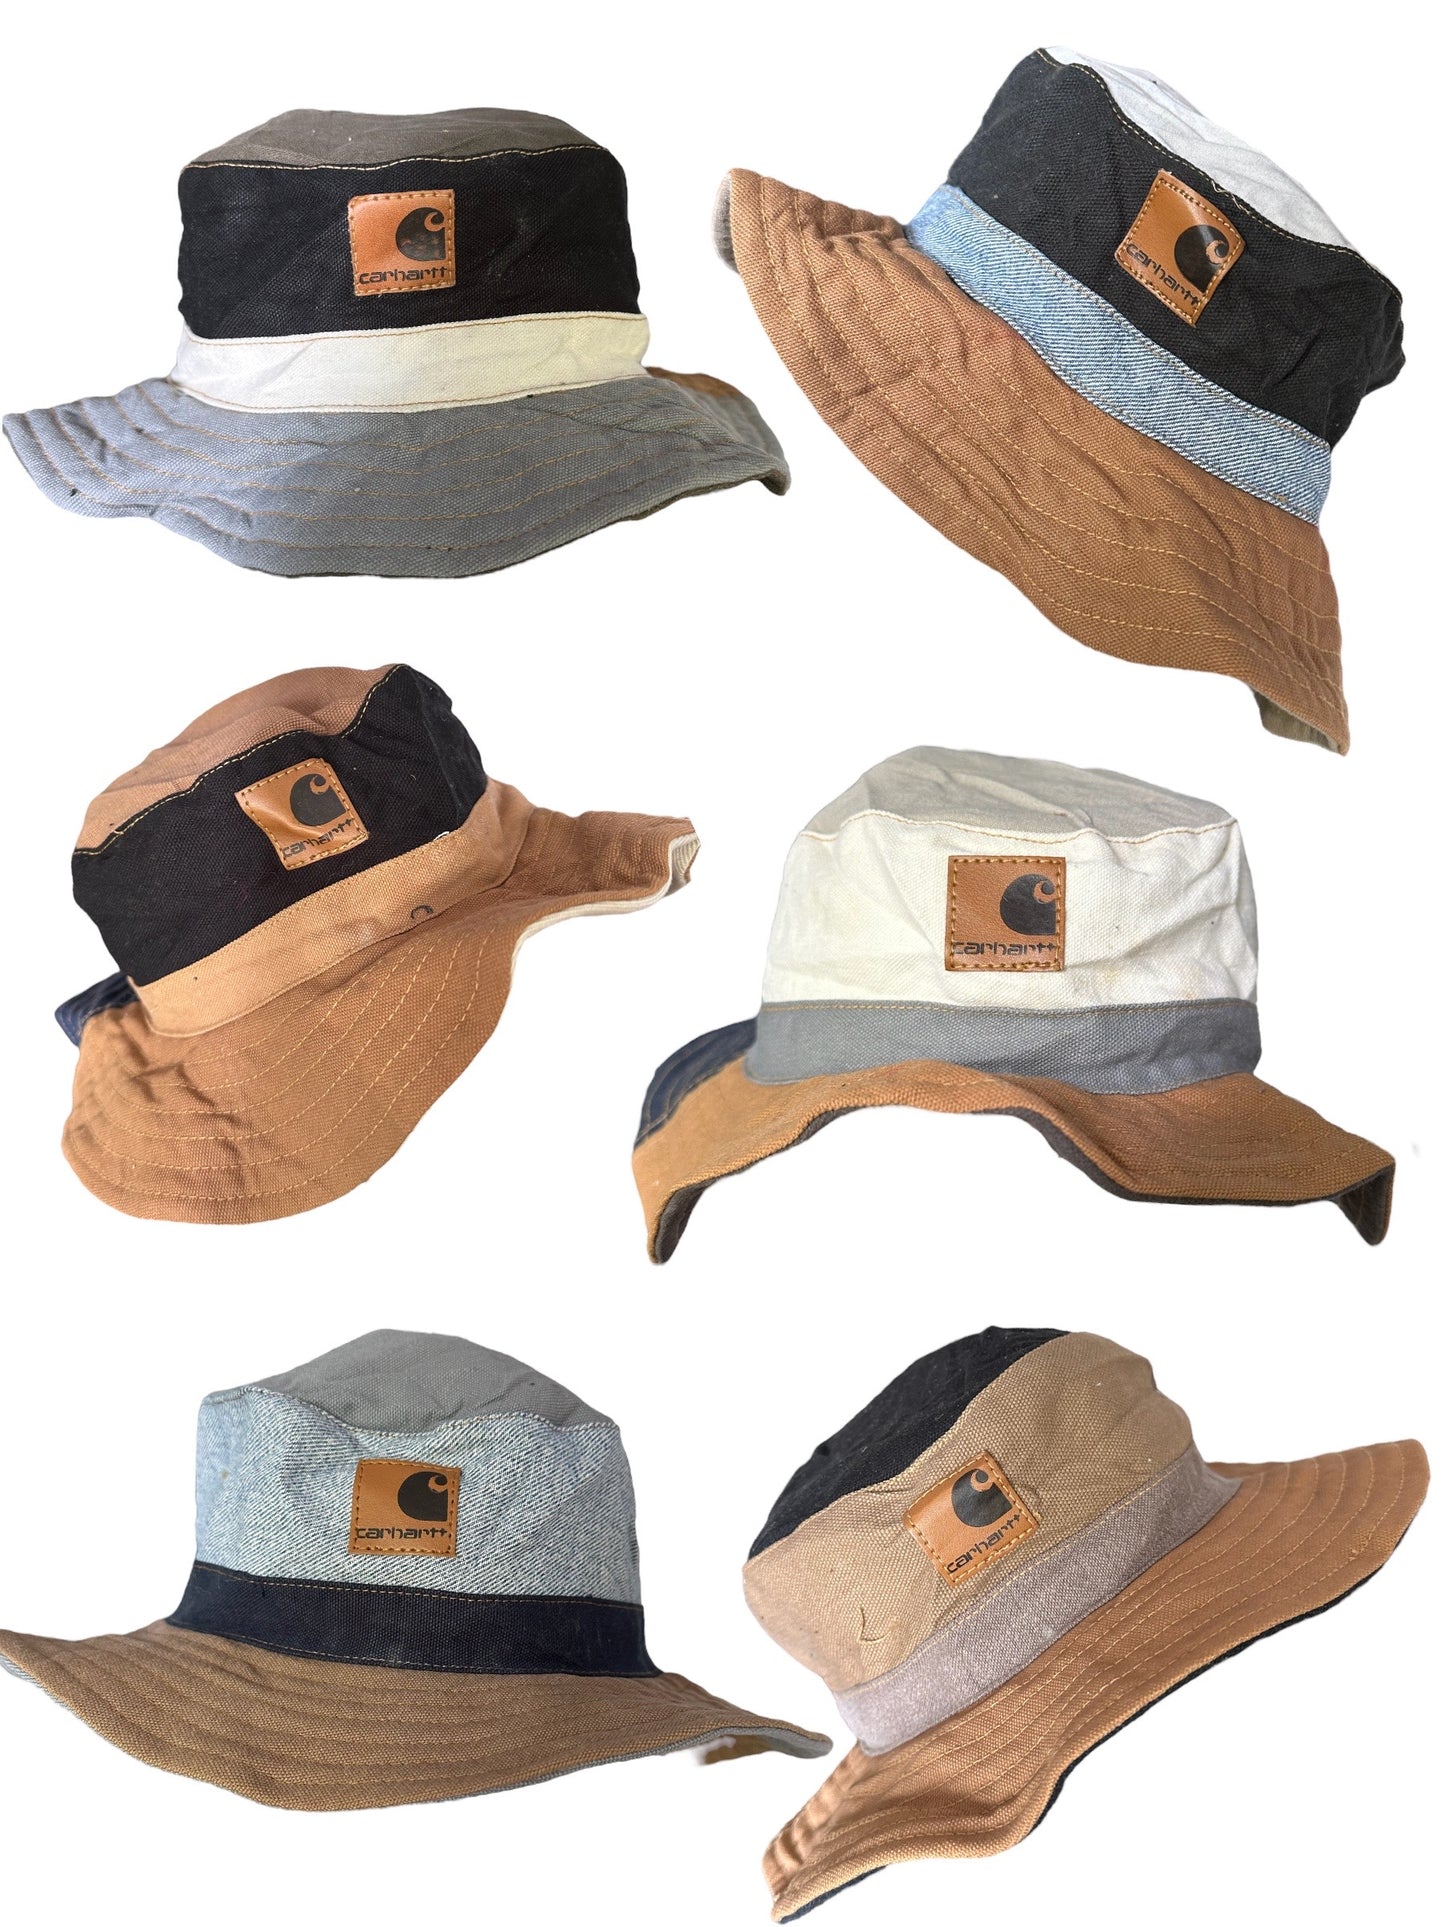 REWORKED CARHARTT HATS - 30 PIECES - BOX